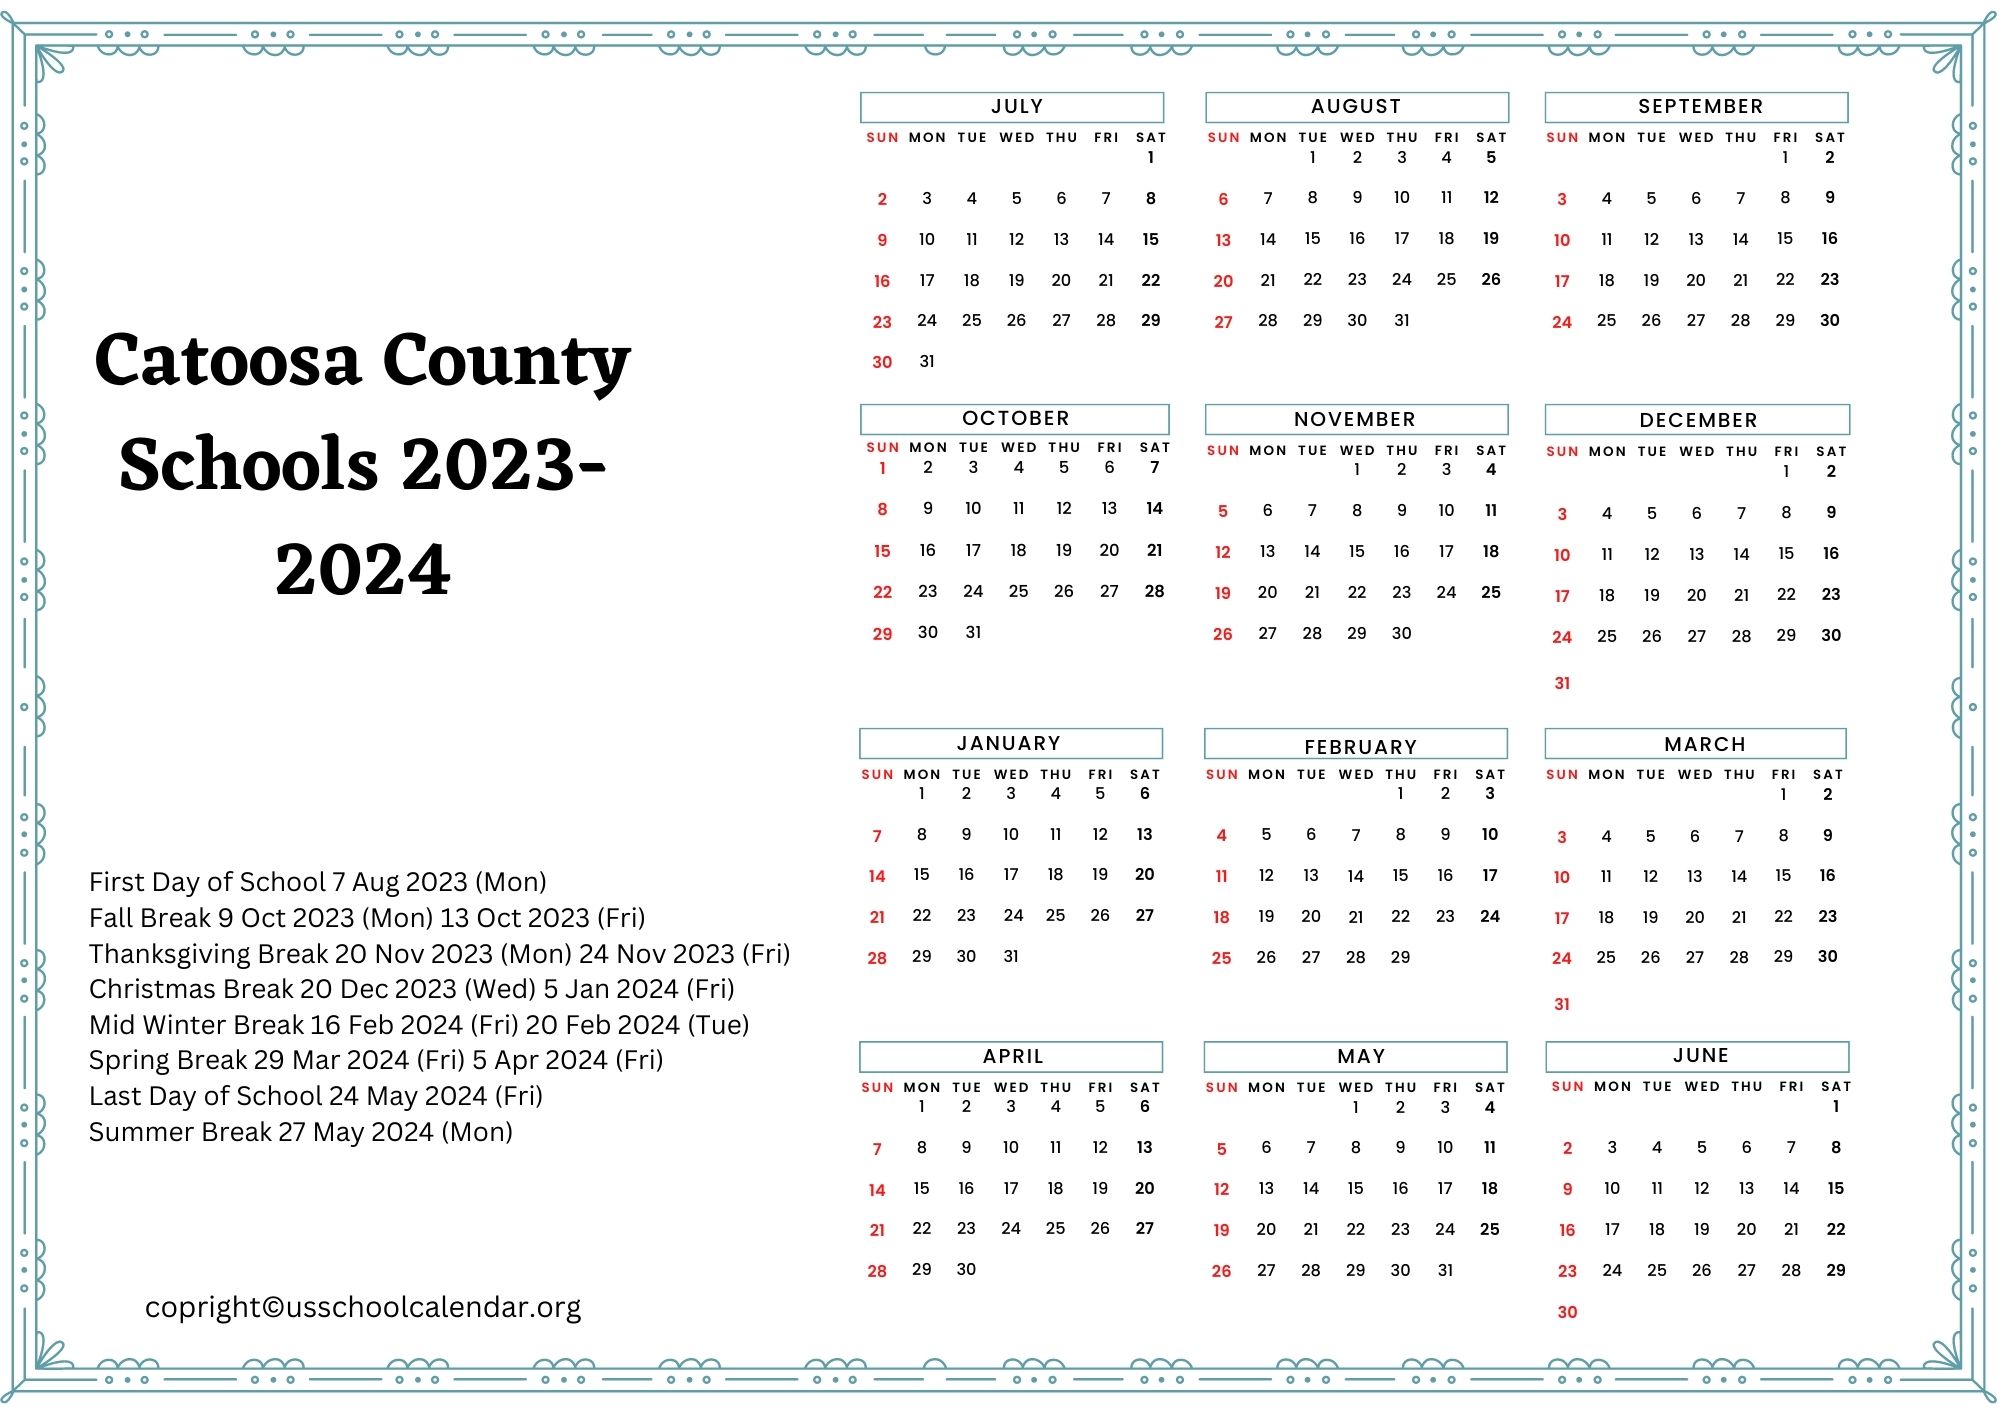 catoosa-county-schools-calendar-with-holidays-2023-2024